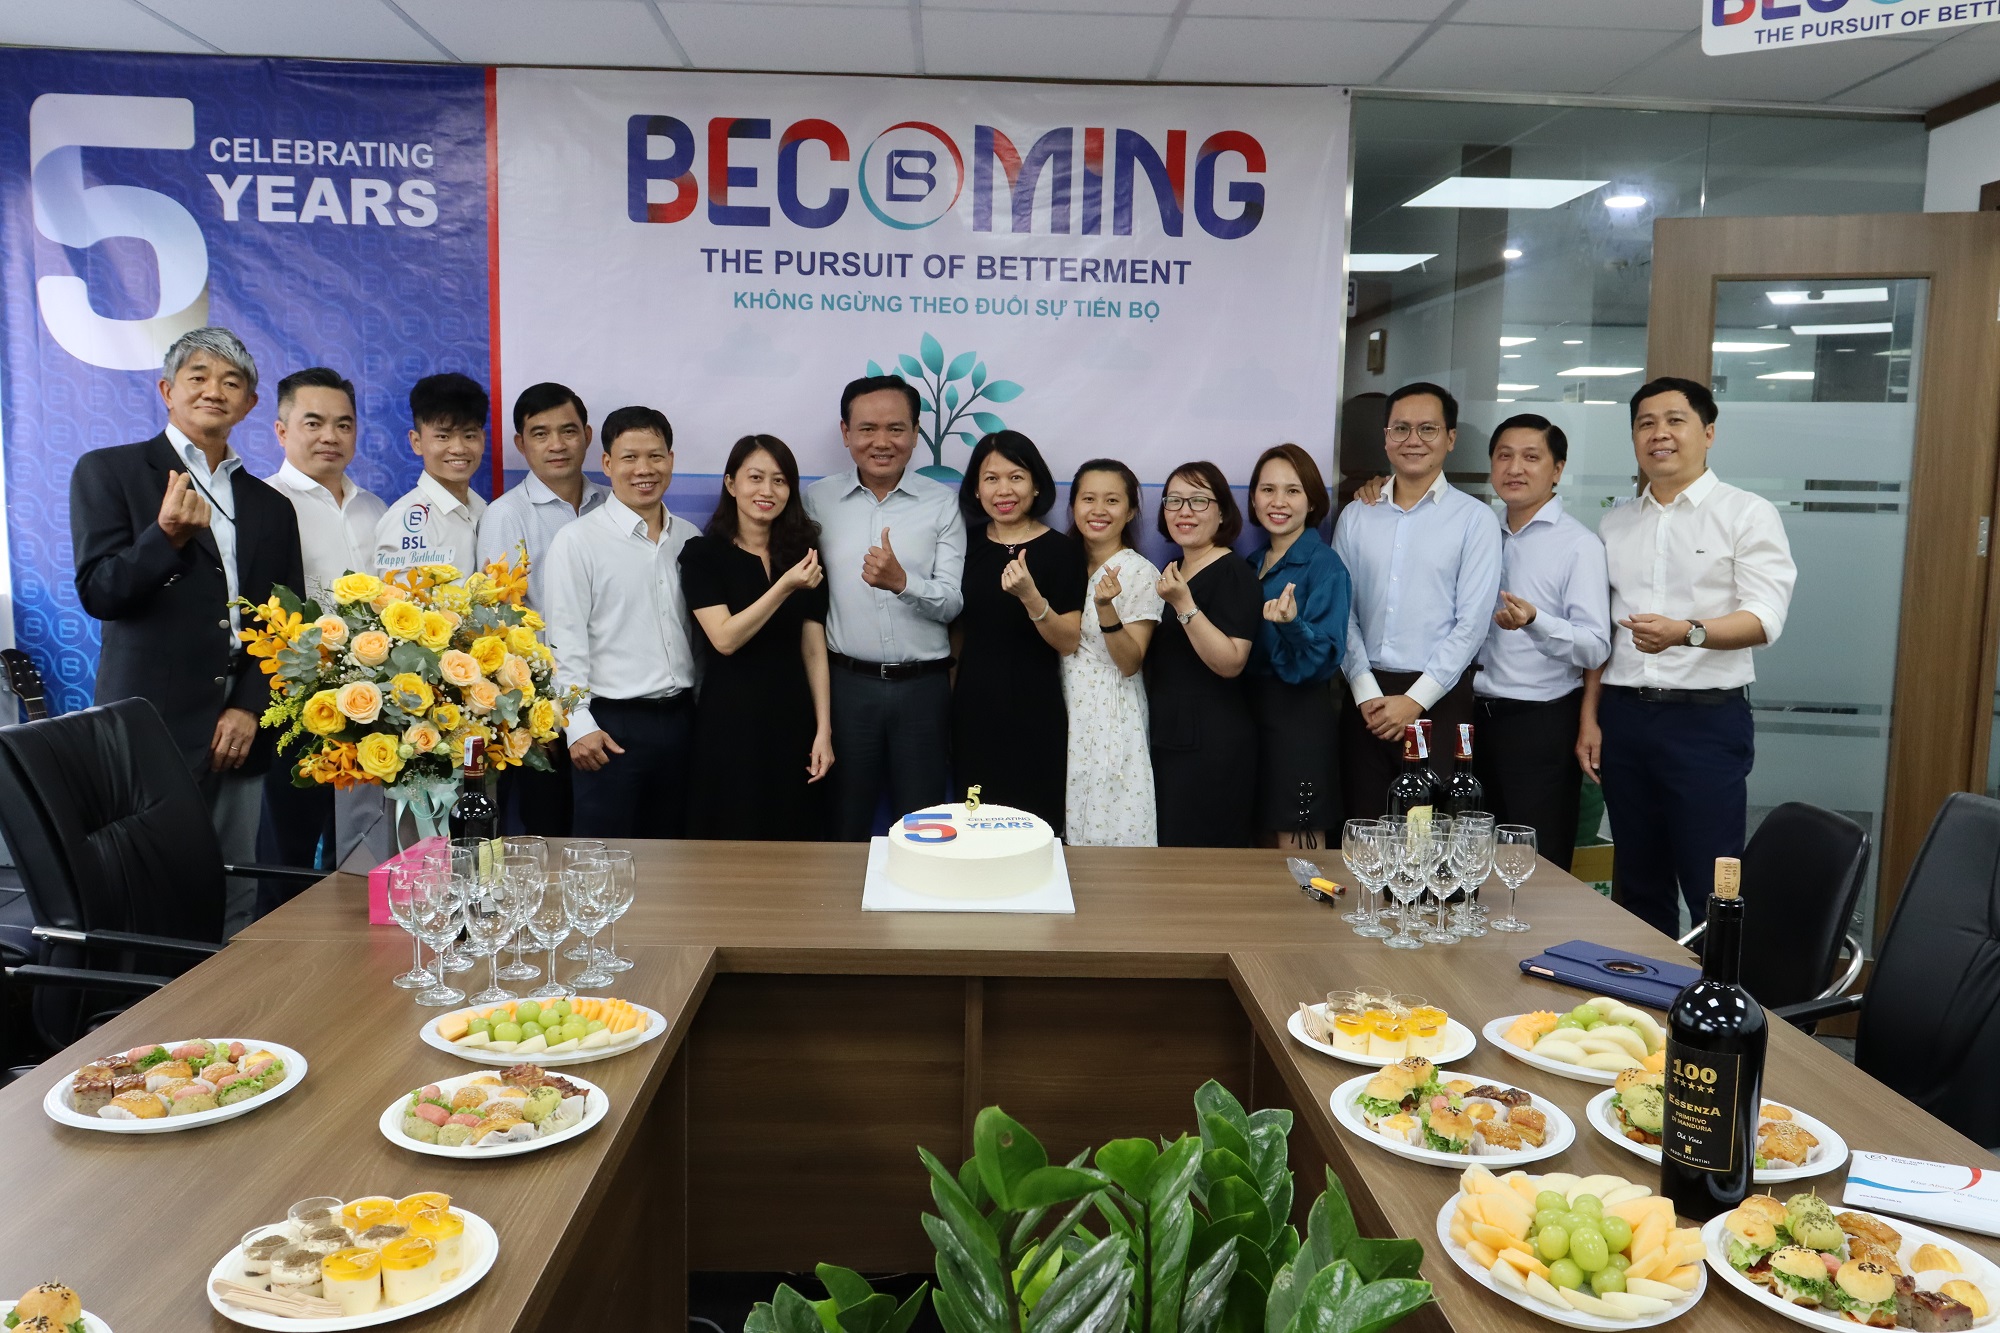 BSL’s Ho Chi Minh City Branch members